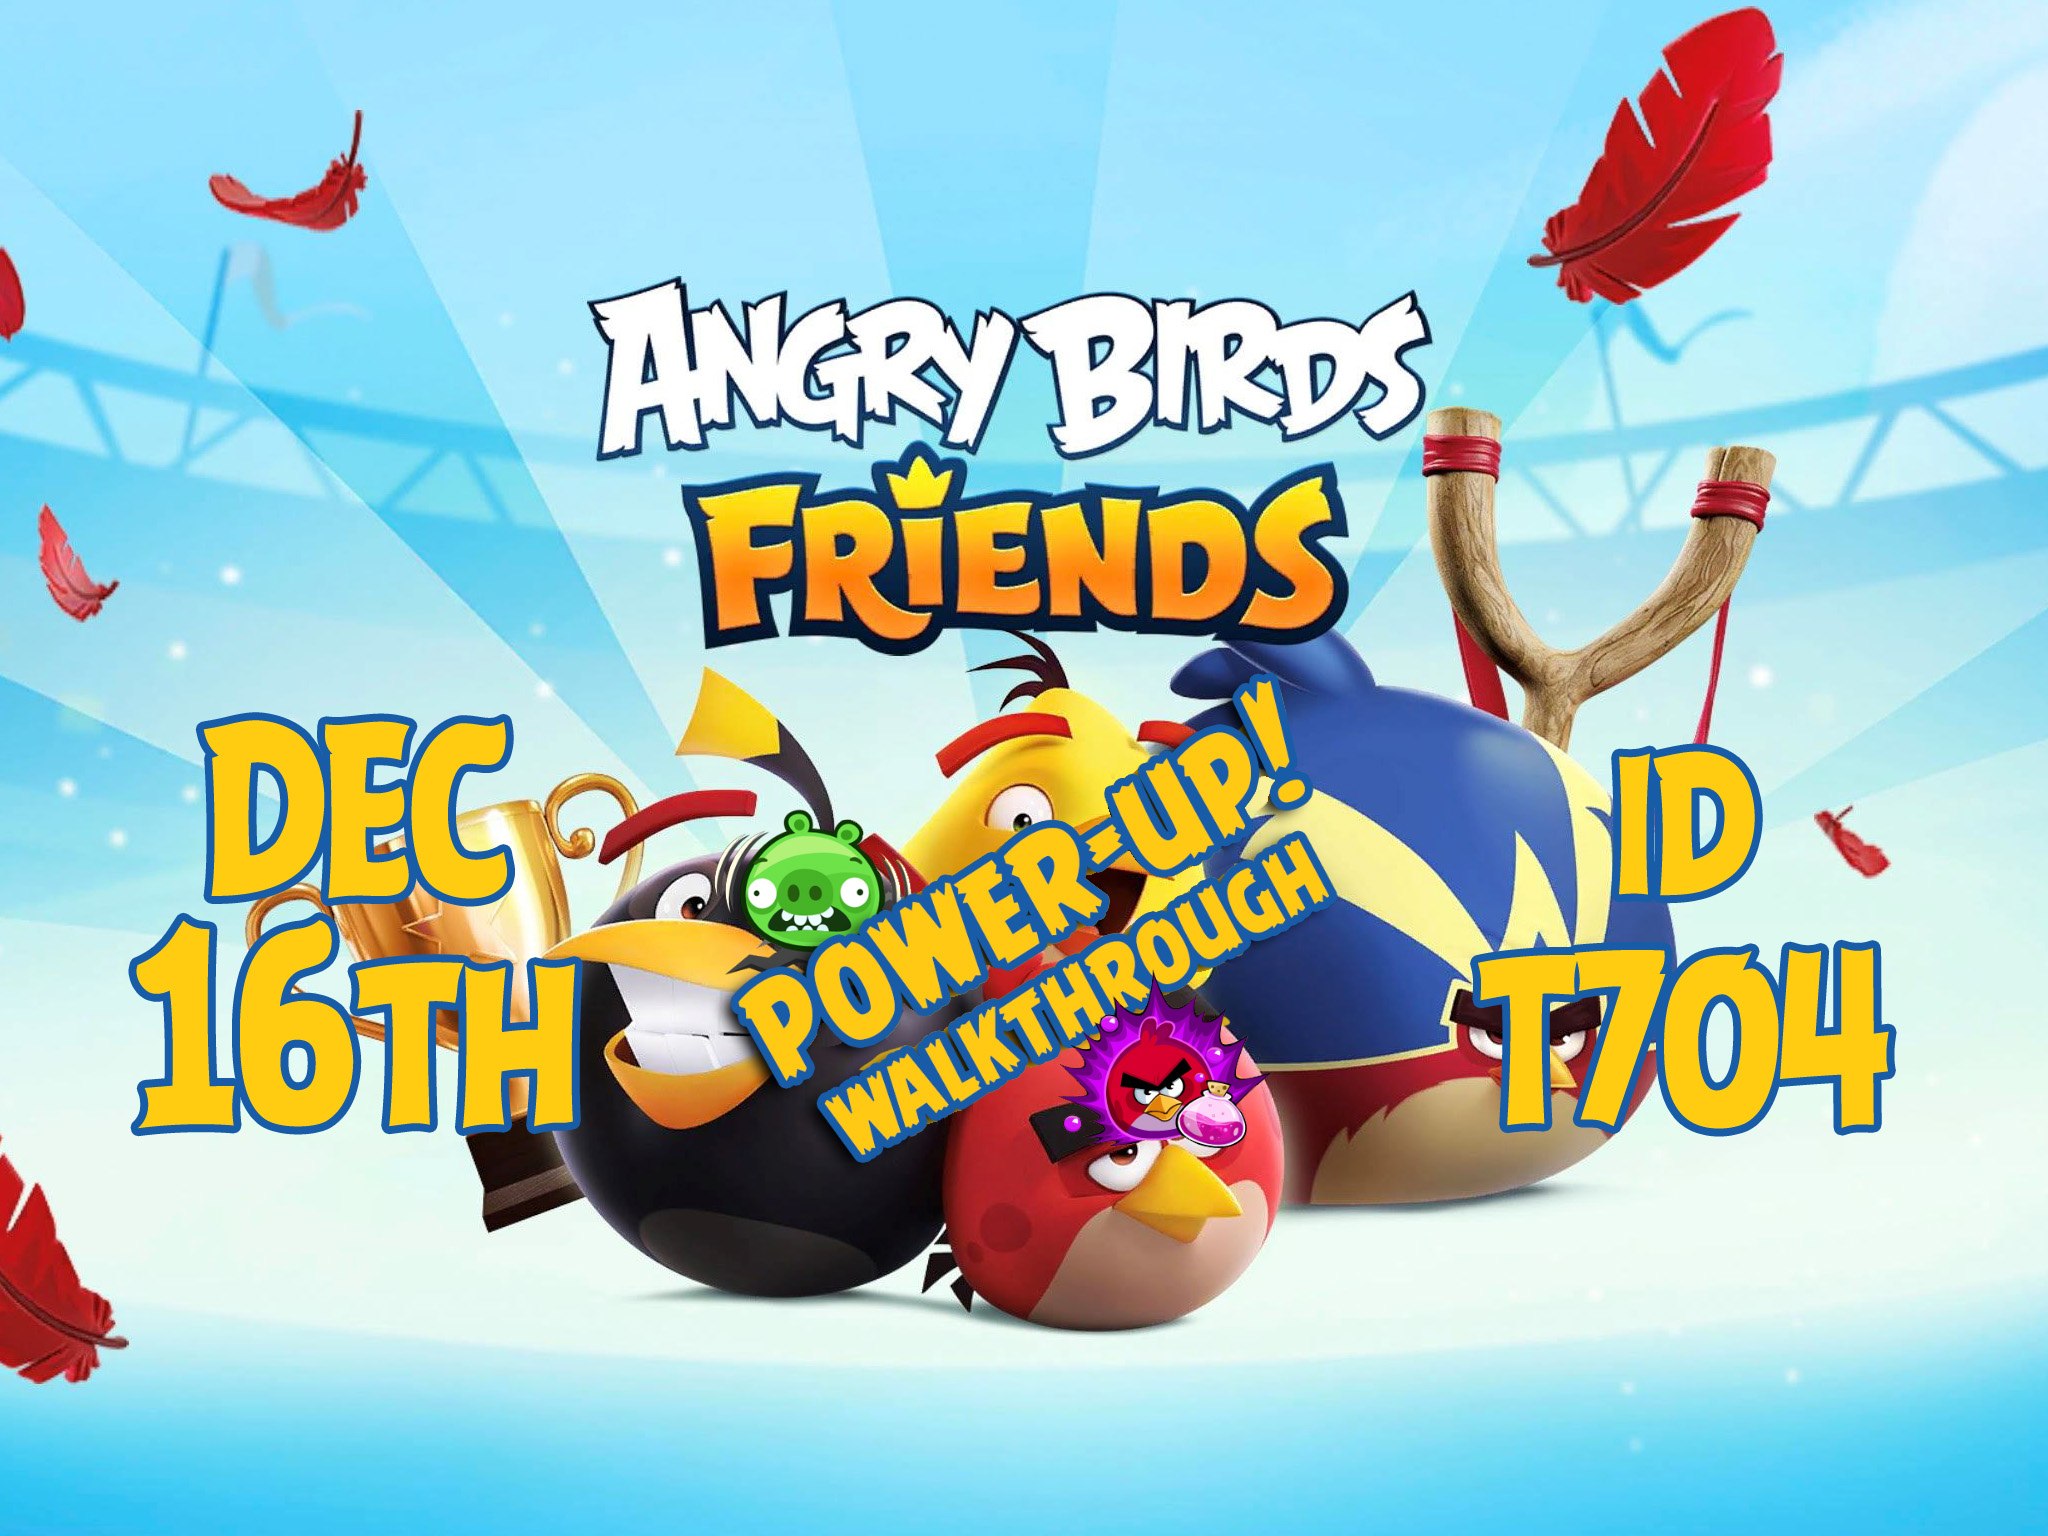 Angry-Birds-Friends-Tournament-T704-Feature-Image-PU